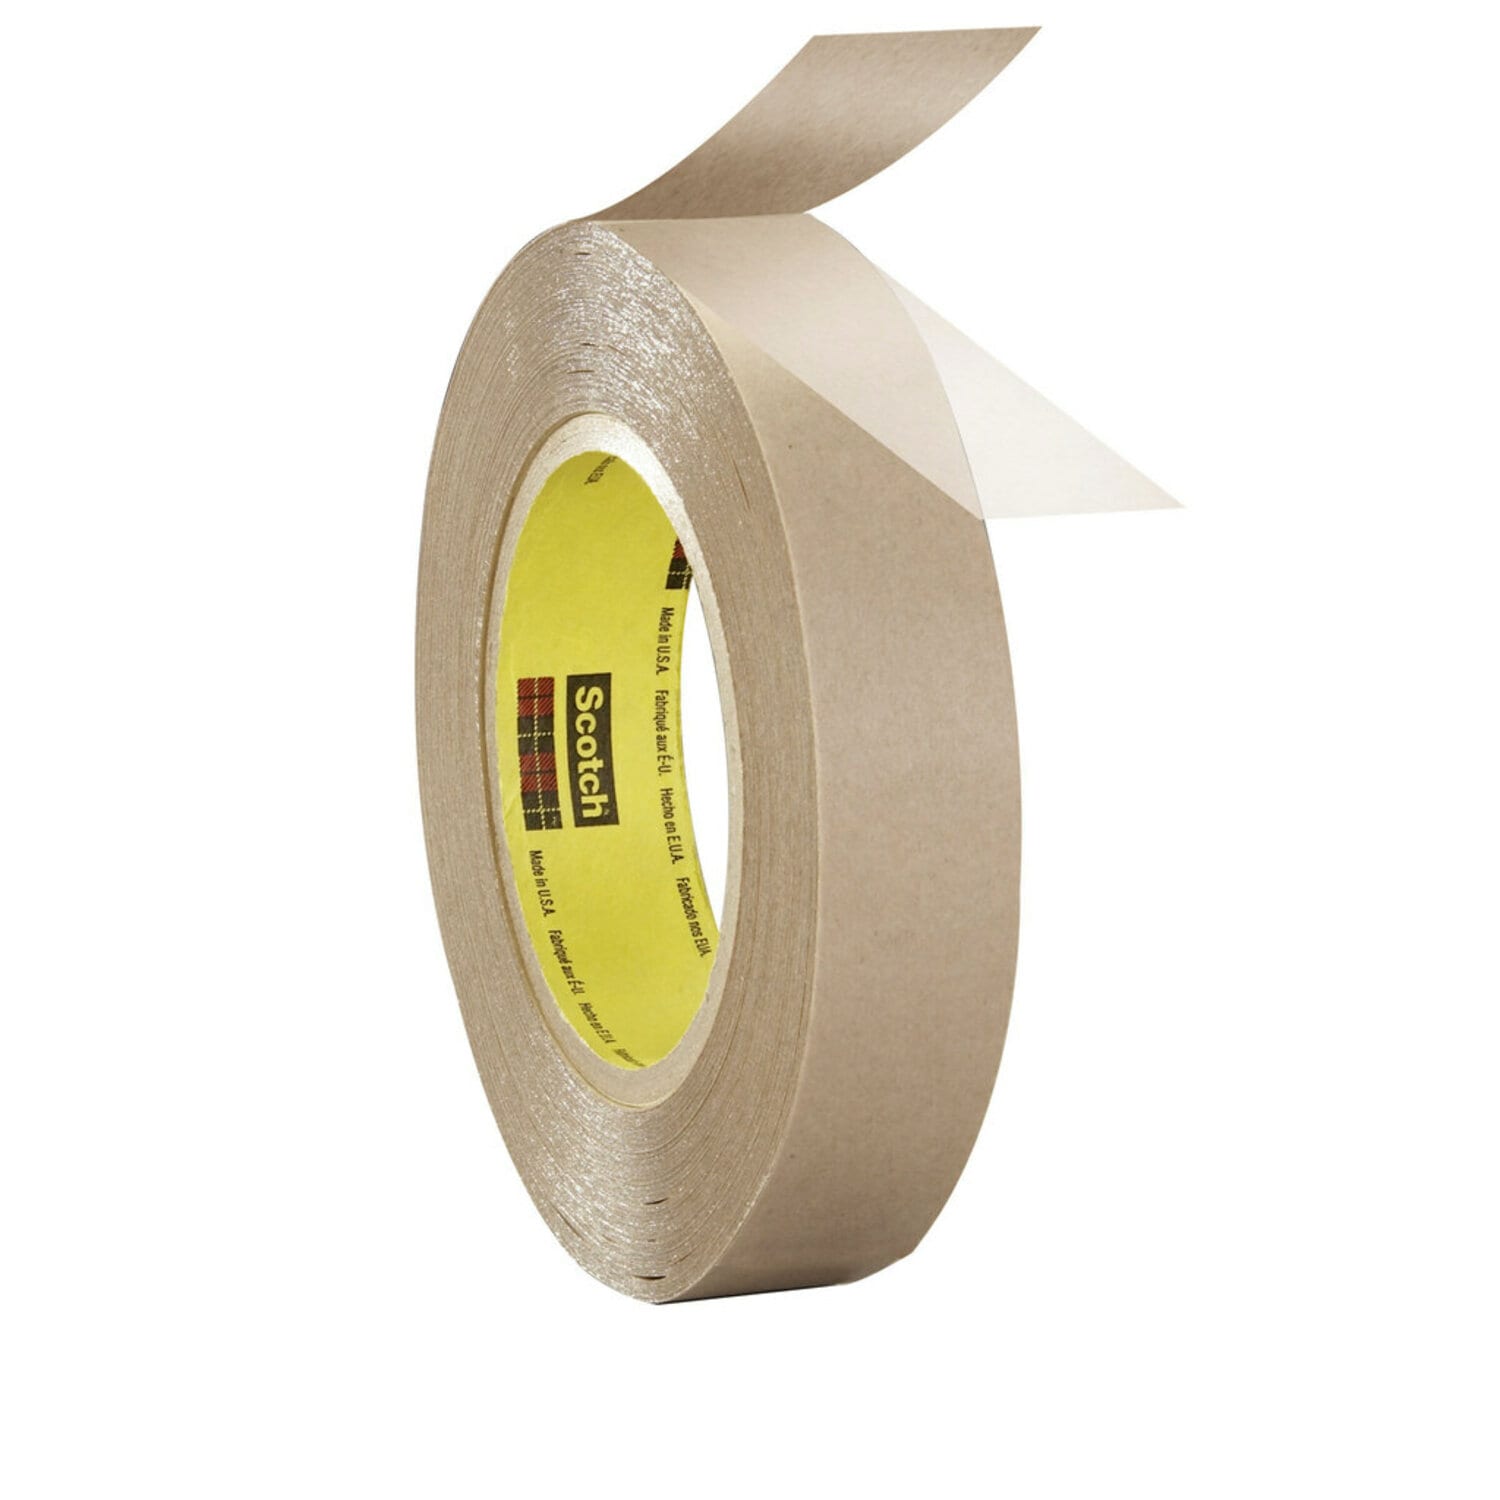 7100073107 - 3M Double Coated Tape 9832HL, Clear, 4.8 mil, Roll, Config